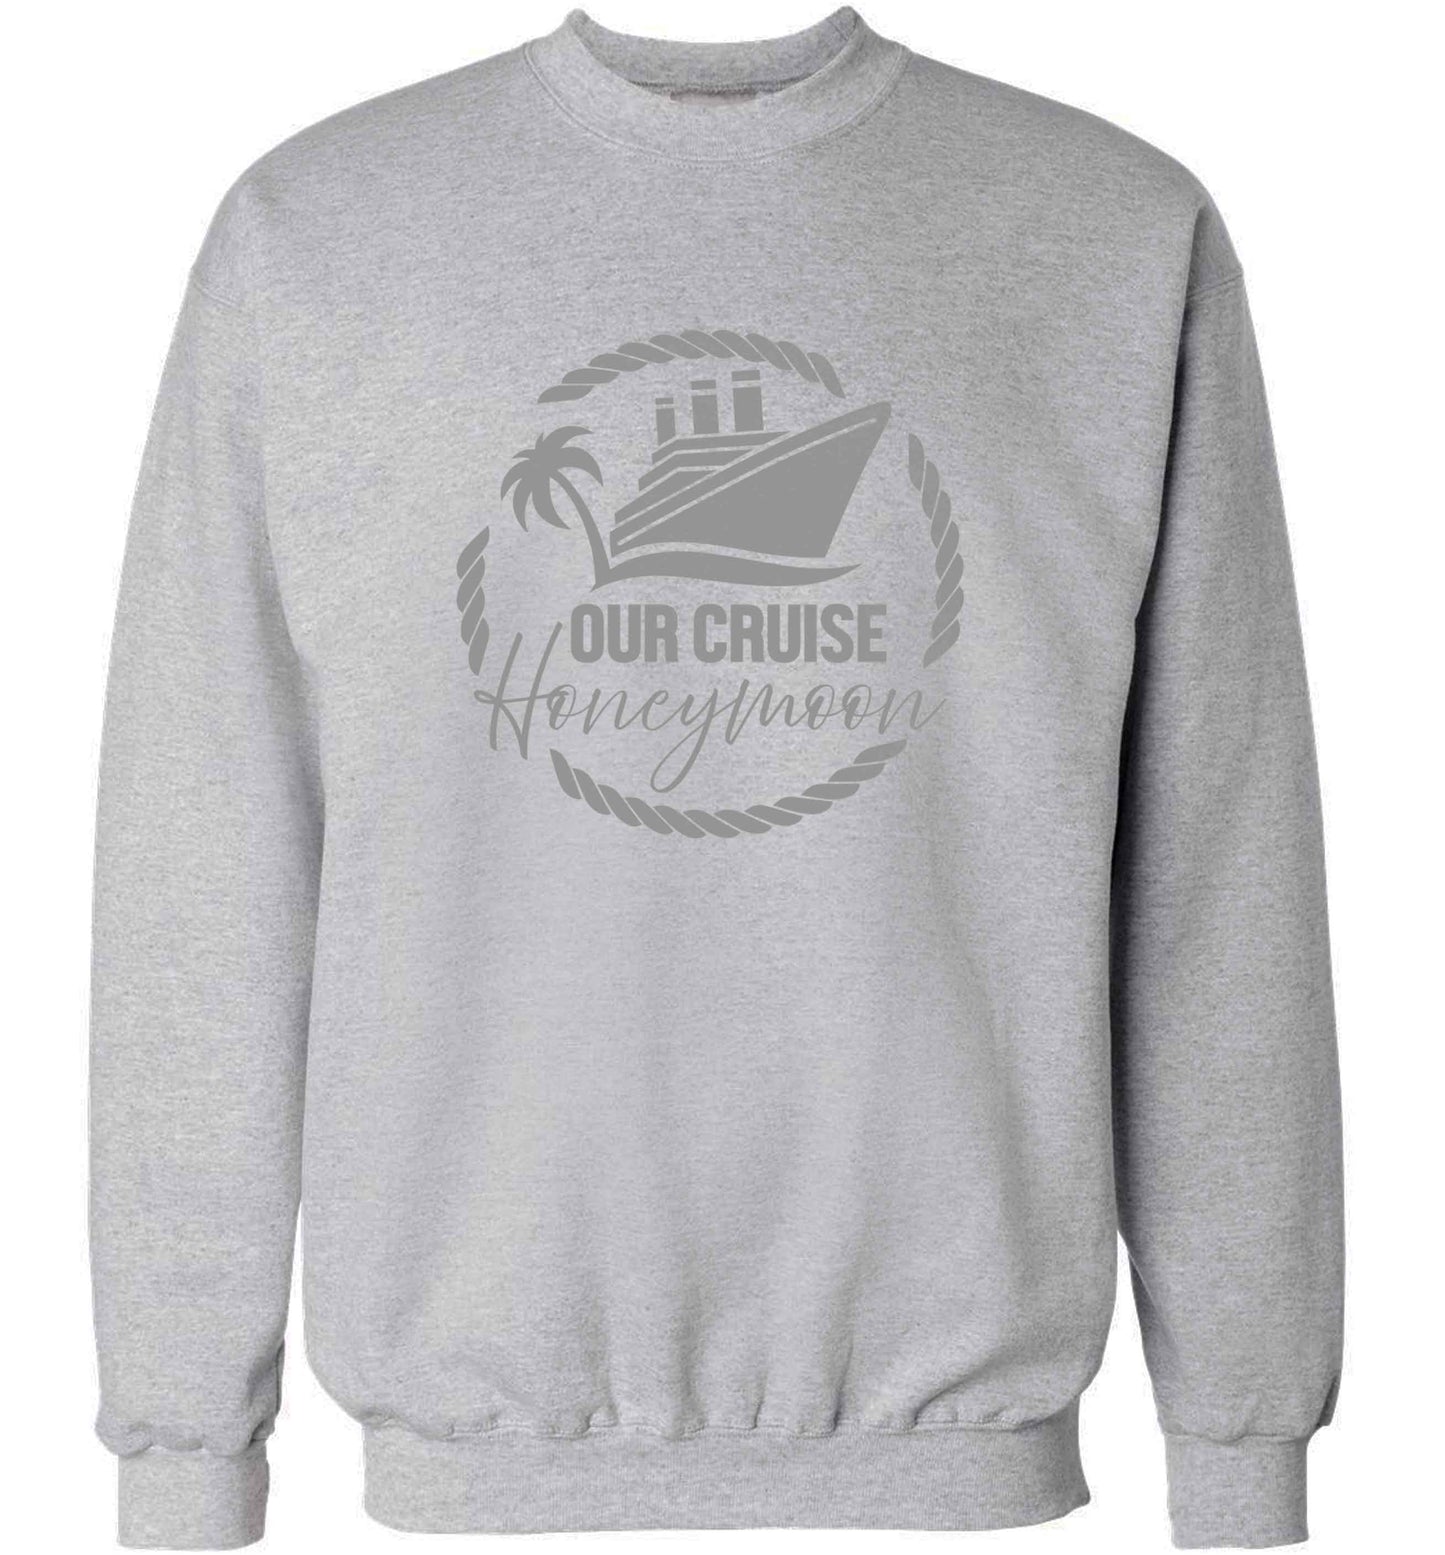 Our cruise honeymoon adult's unisex grey sweater 2XL